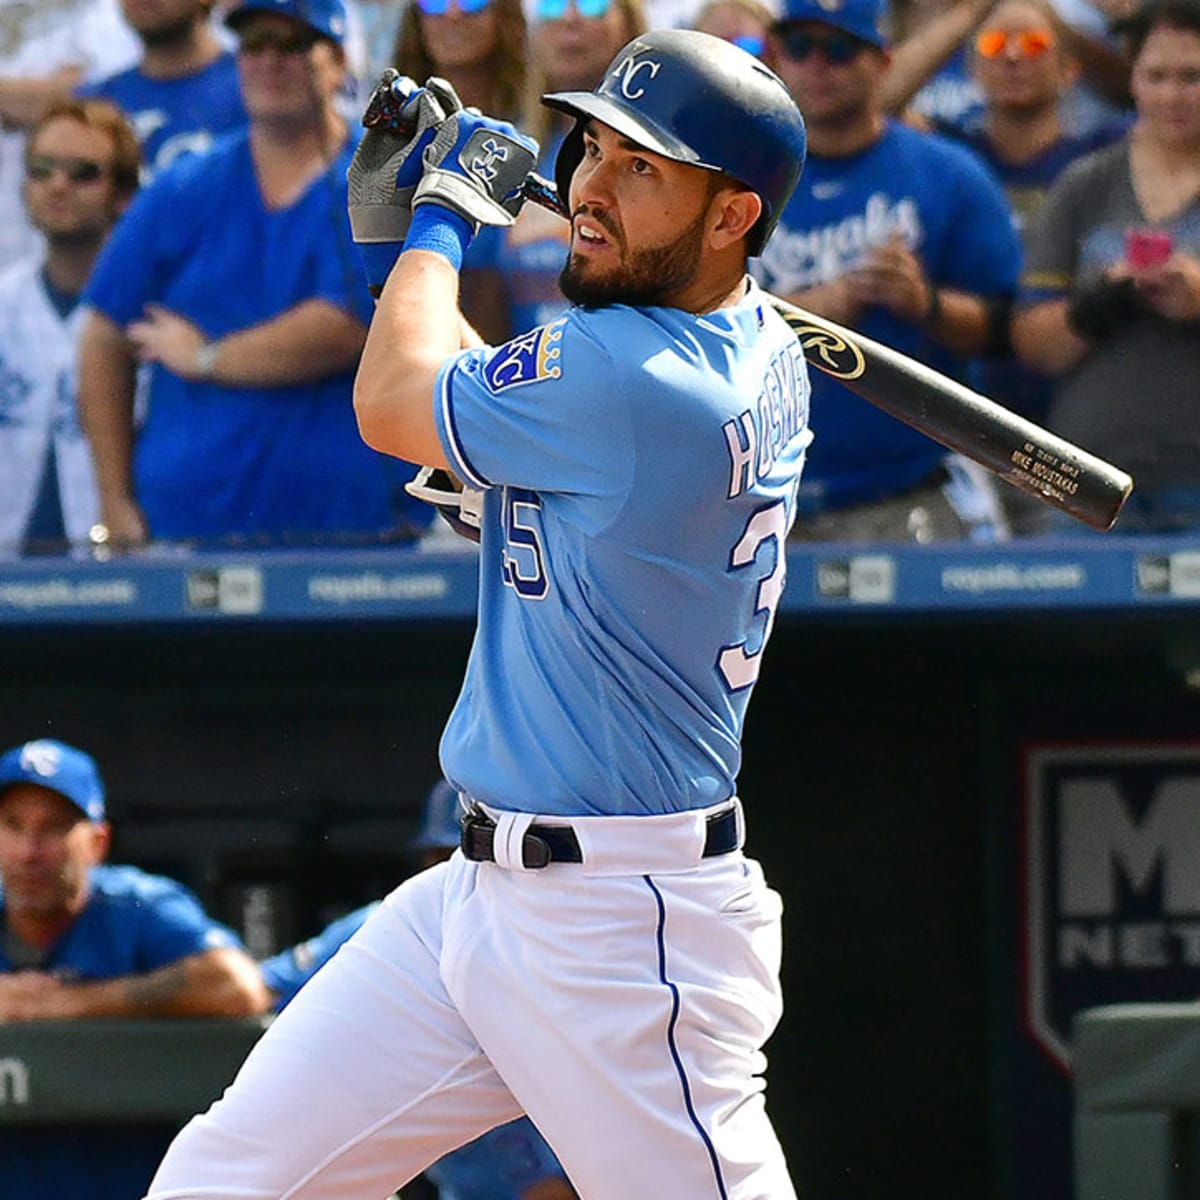 Eric Hosmer joins Padres on 8-year, $144M deal - Sports Illustrated